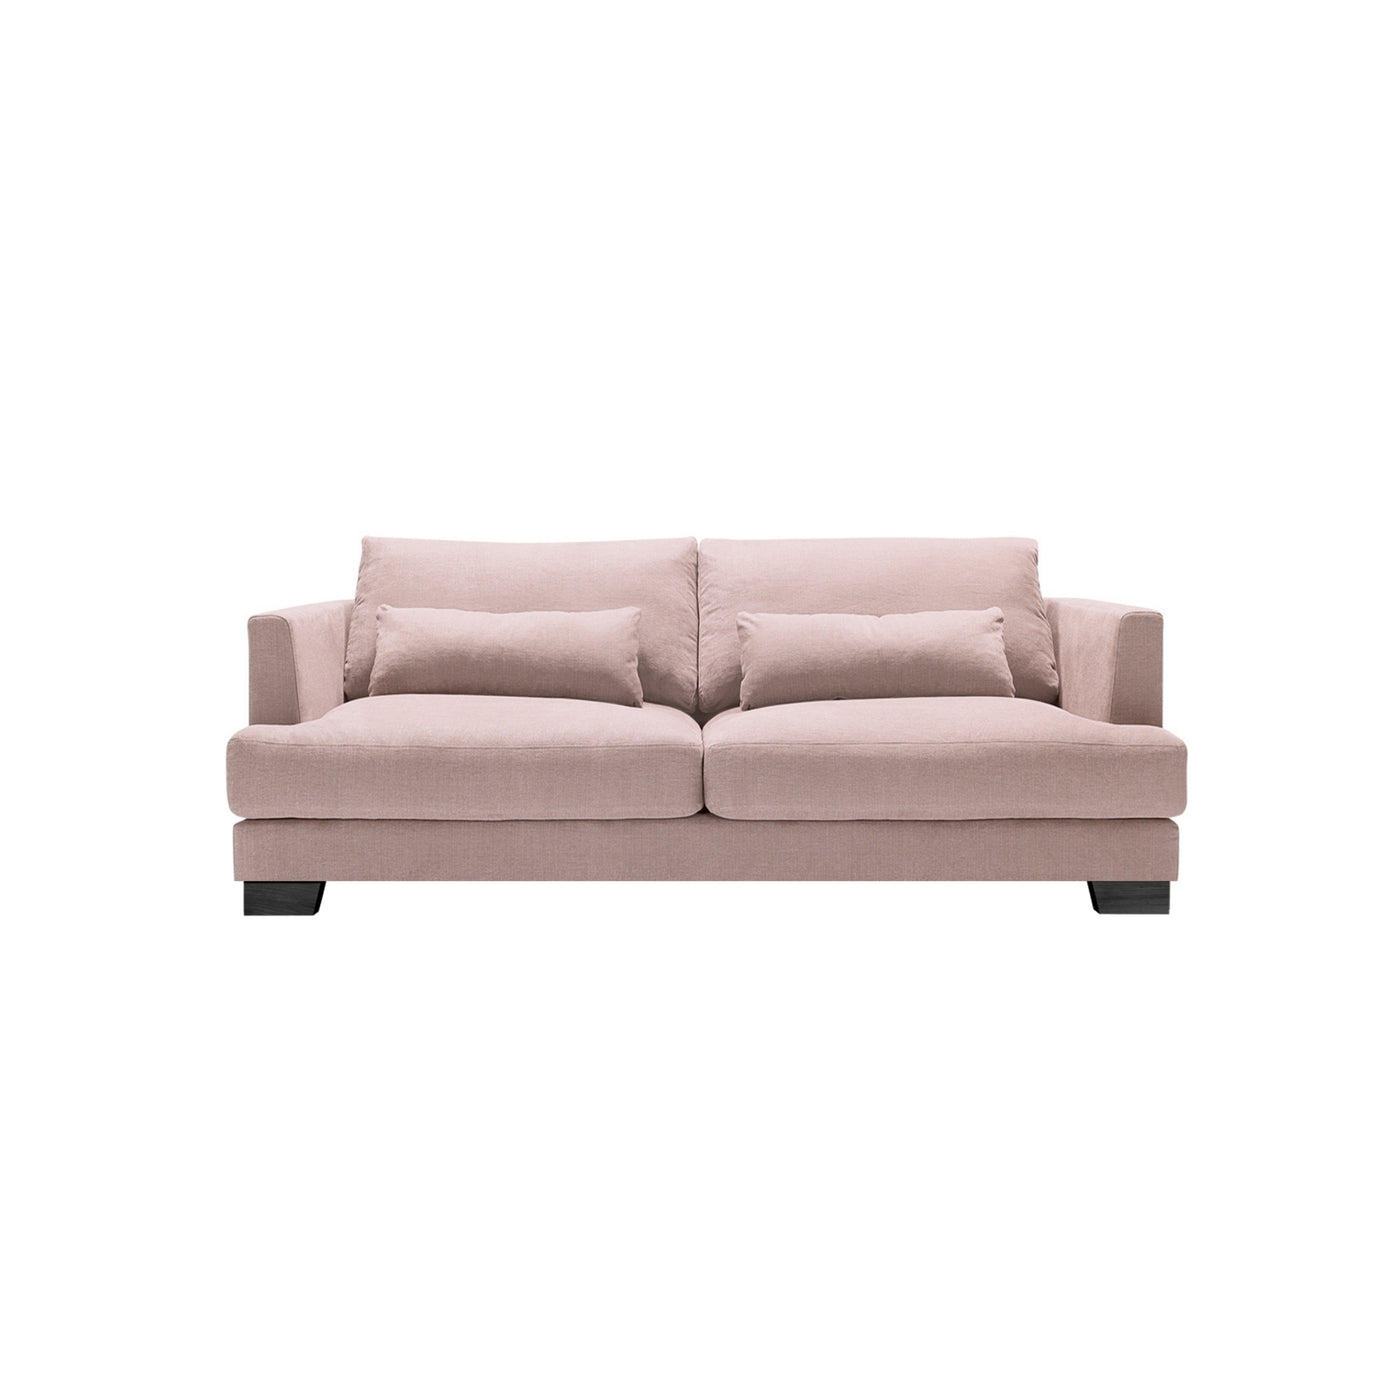 someday designs toft 2 seater sofa in pure 04 nude pink black legs. #colour_pure-04-nude-pink